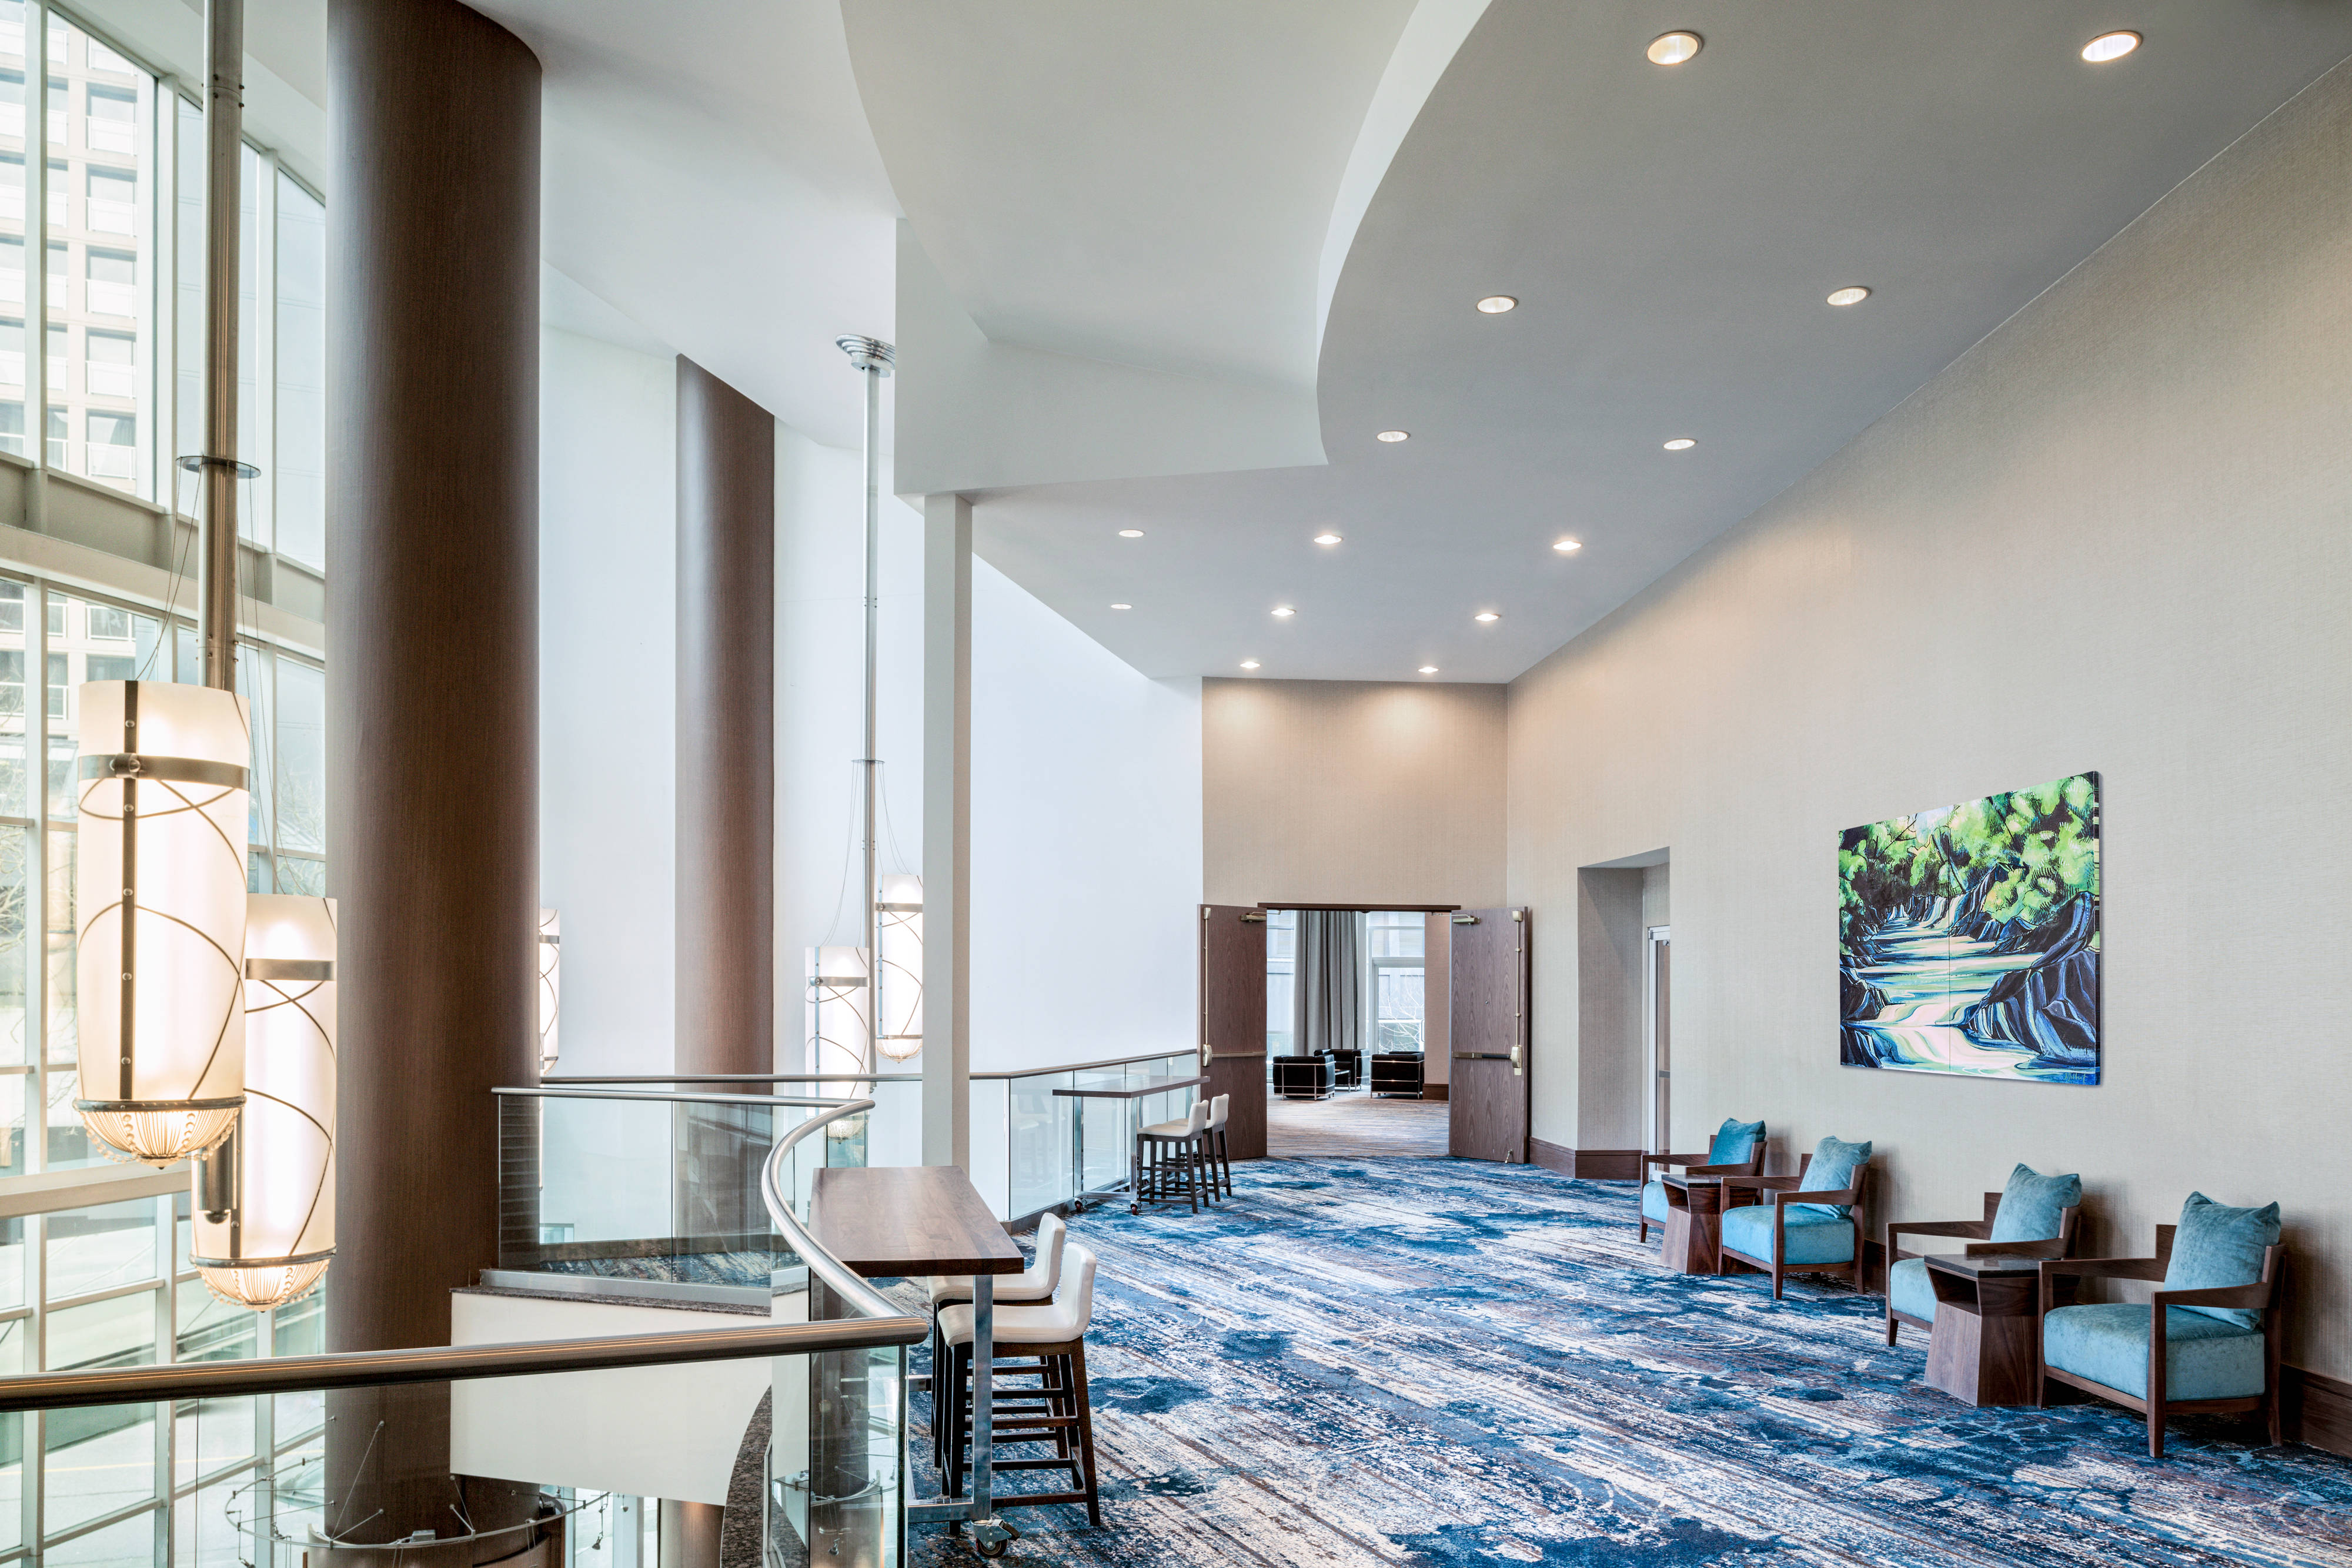 A brightly-lit open lobby space with table seating and padded chairs.